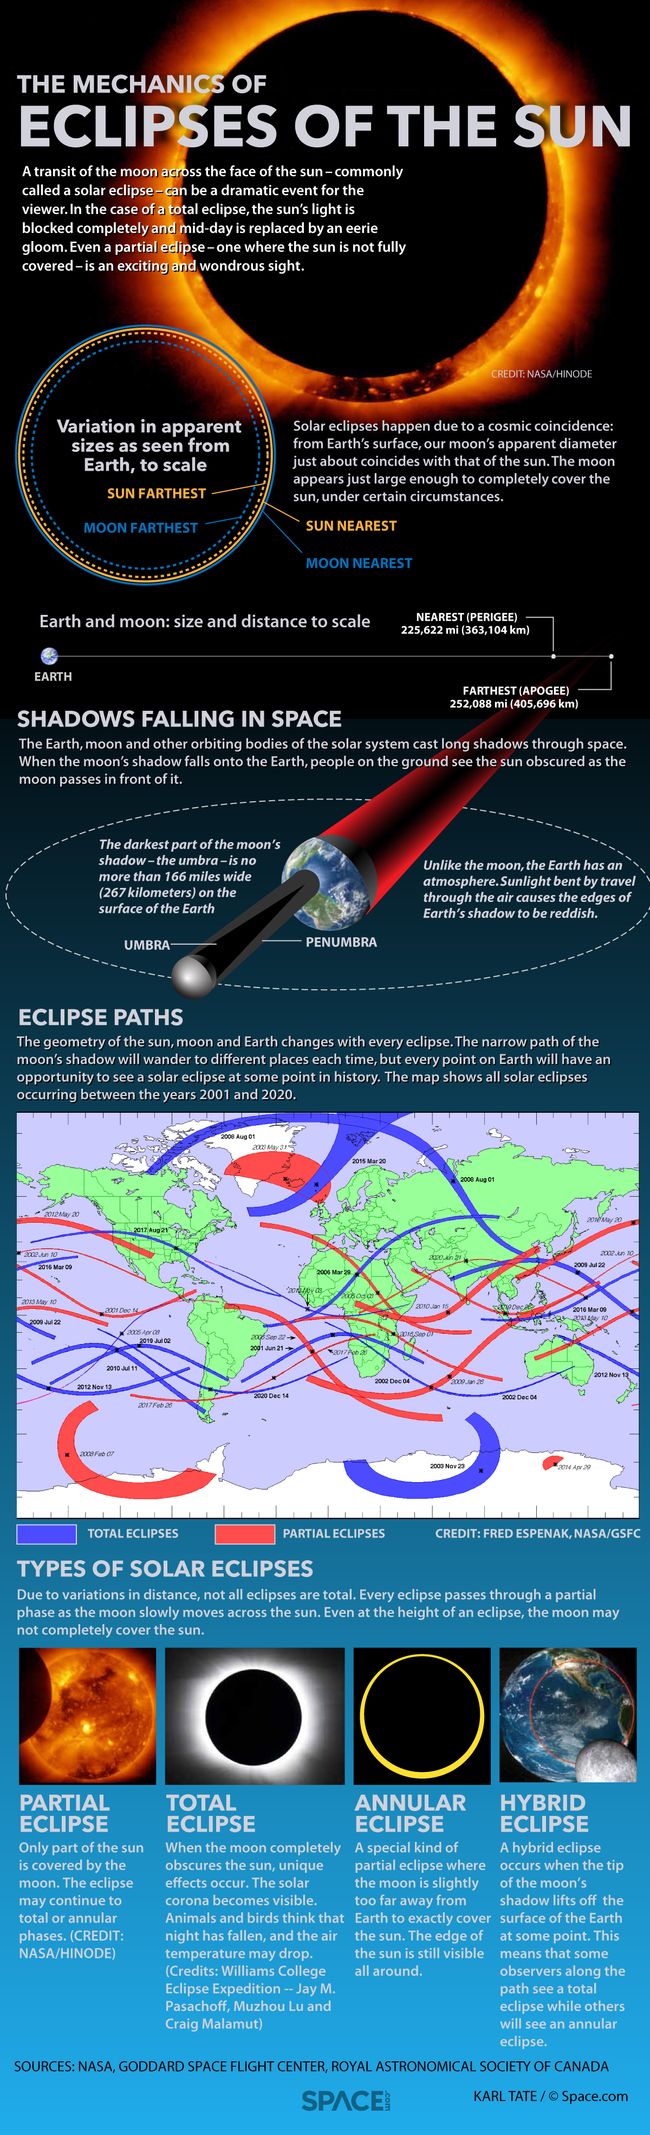 How often do total solar eclipses occur